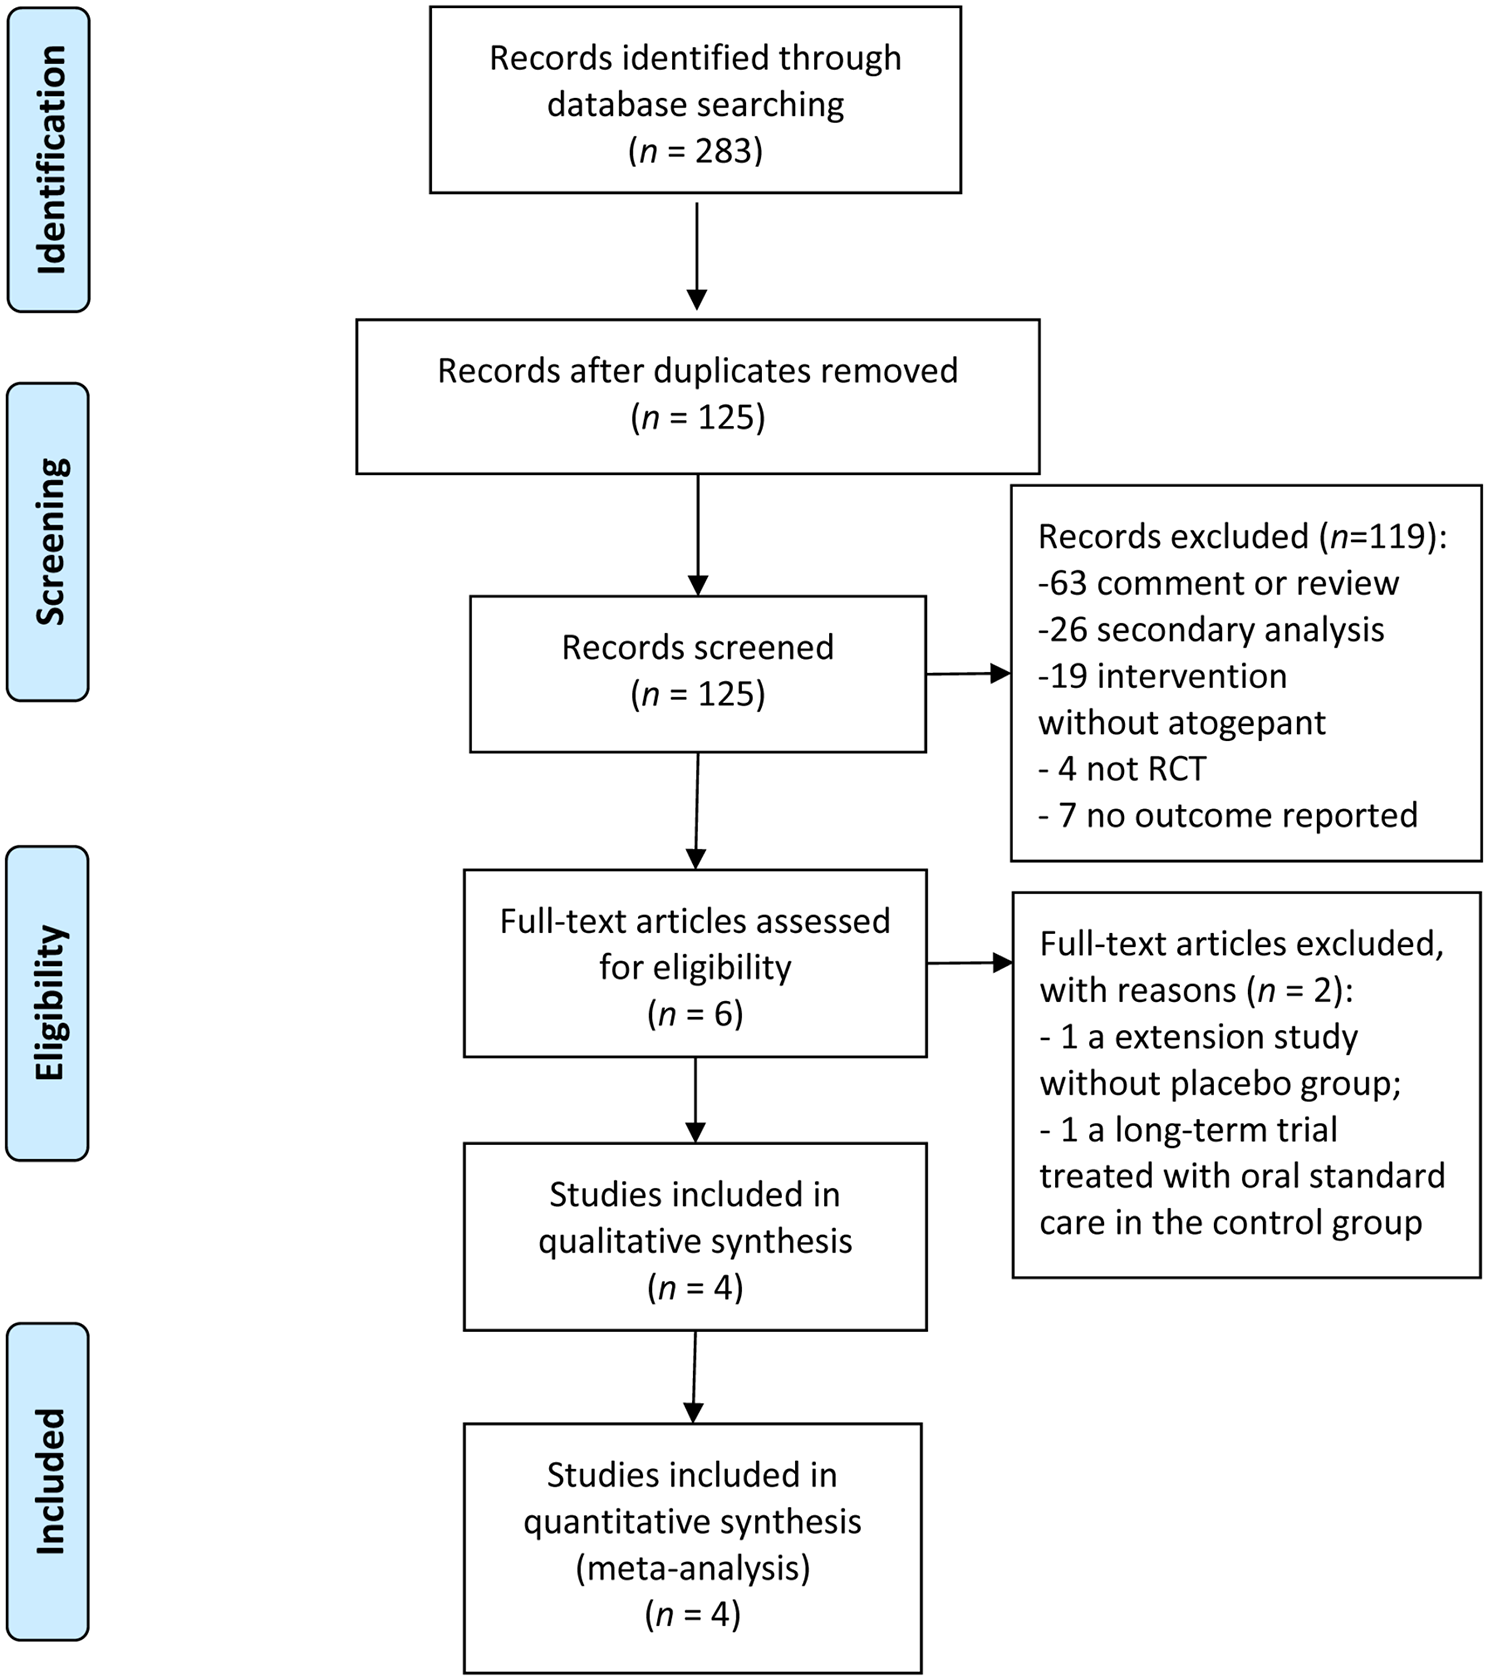 Efficacy and safety of atogepant, a small molecule CGRP receptor antagonist, for the preventive treatment of migraine: a systematic review and meta-analysis